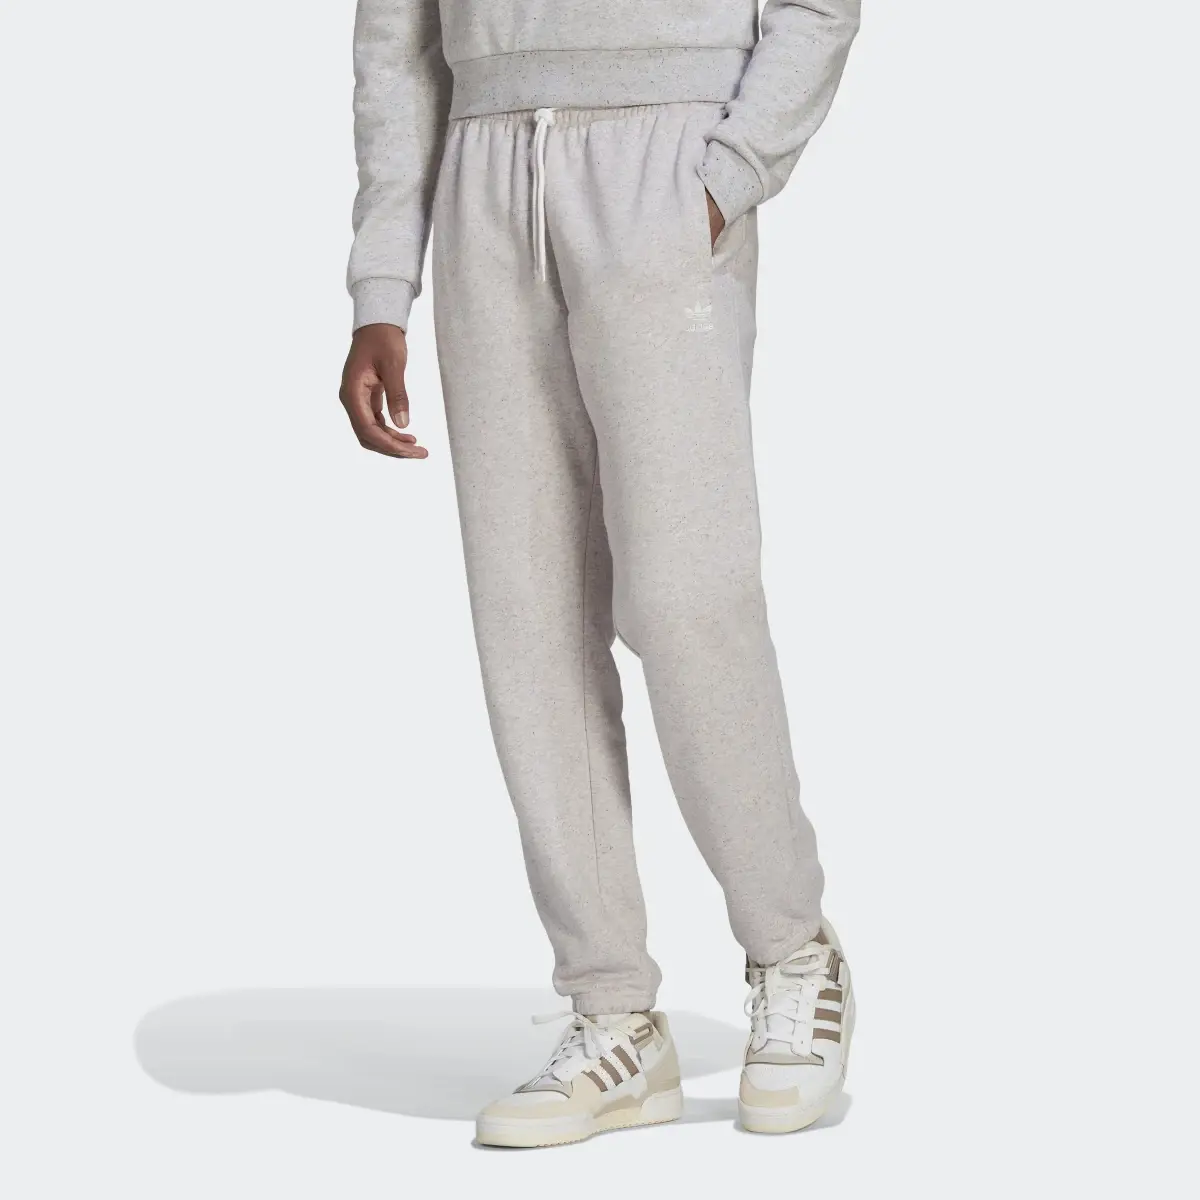 Adidas Sweat pants Essentials+ Made with Nature. 1